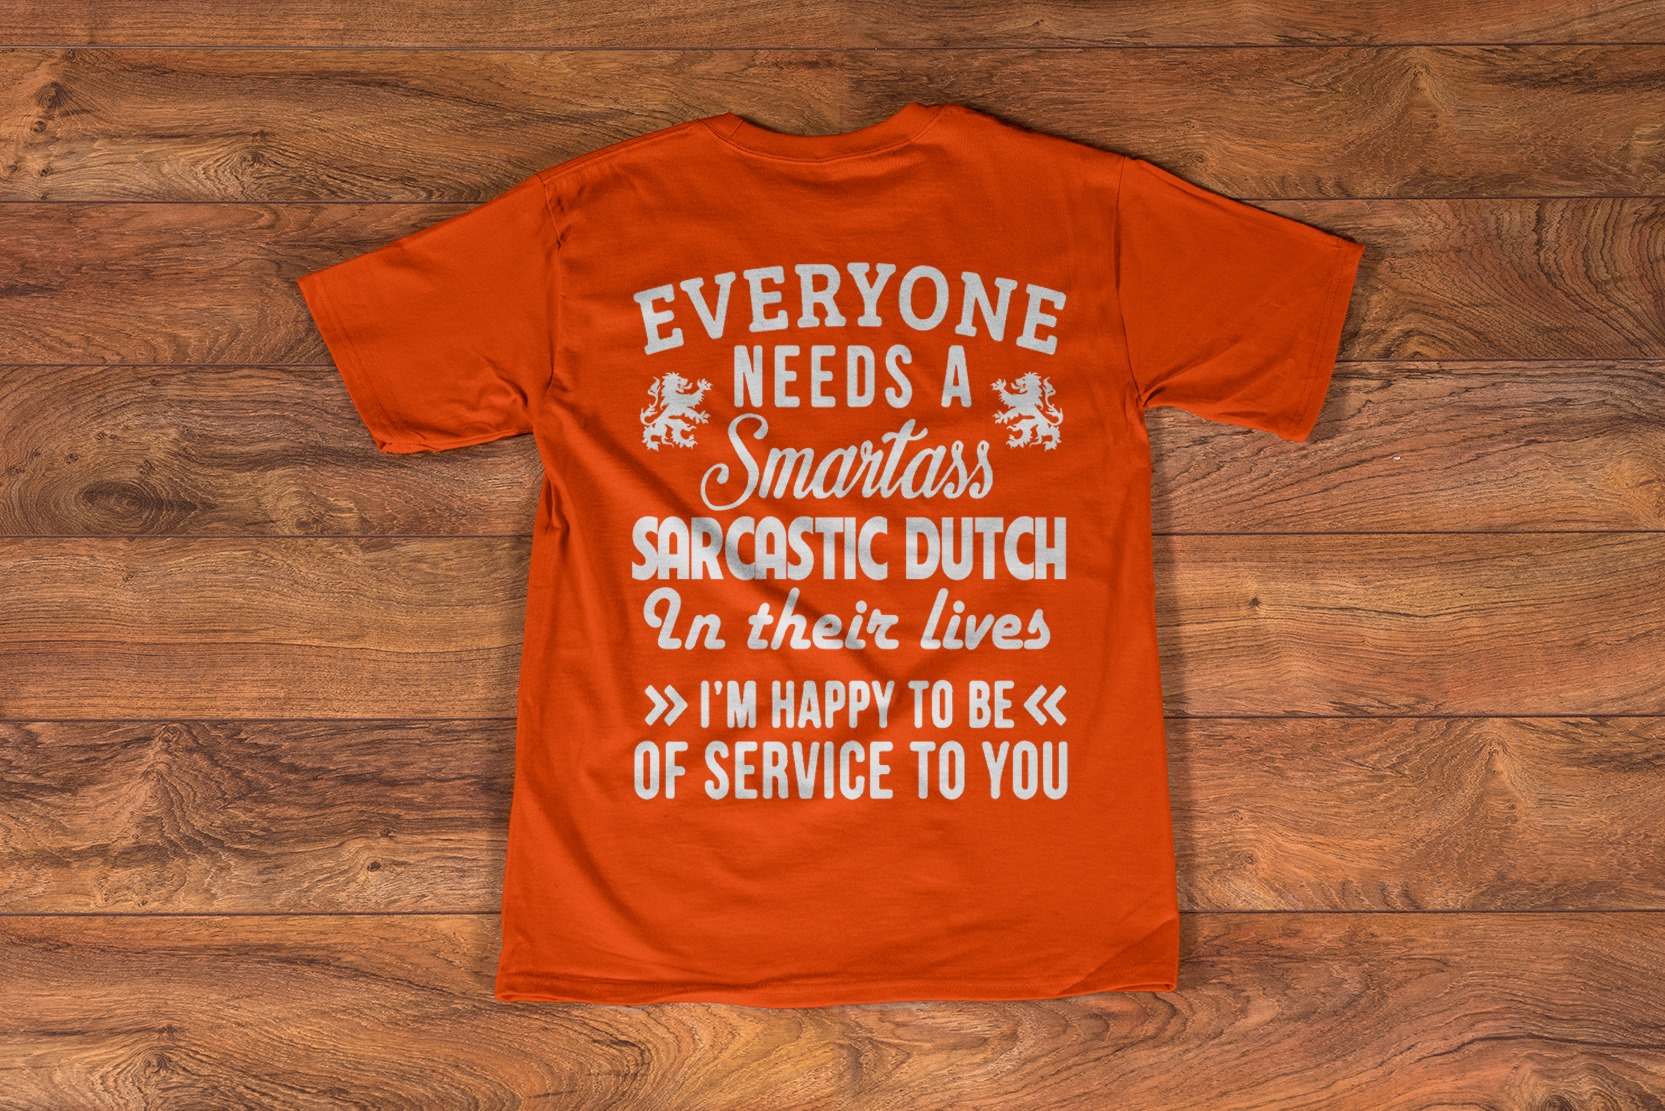 Evetyone needs a smartass sarcastic dutch in their lives i'm happy to be of service to you